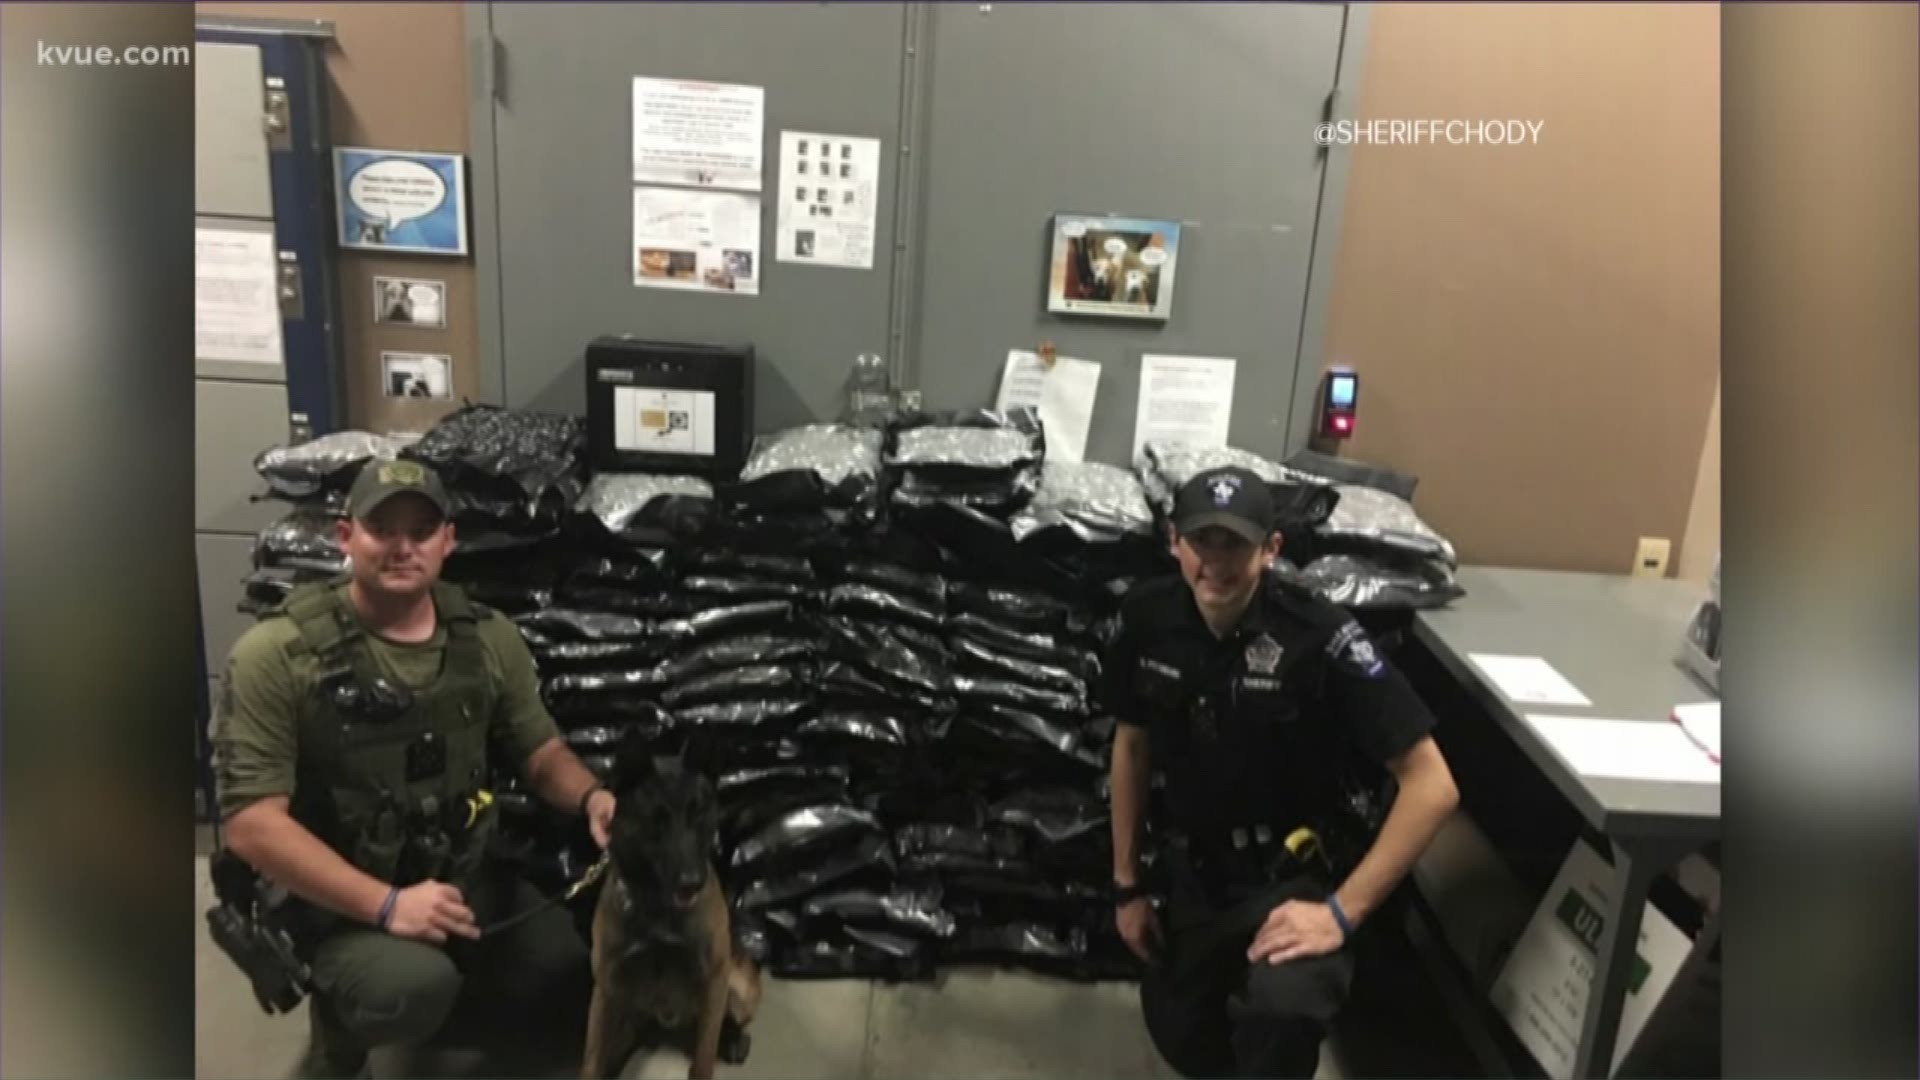 Nearly 200 pounds of pot is off the streets.